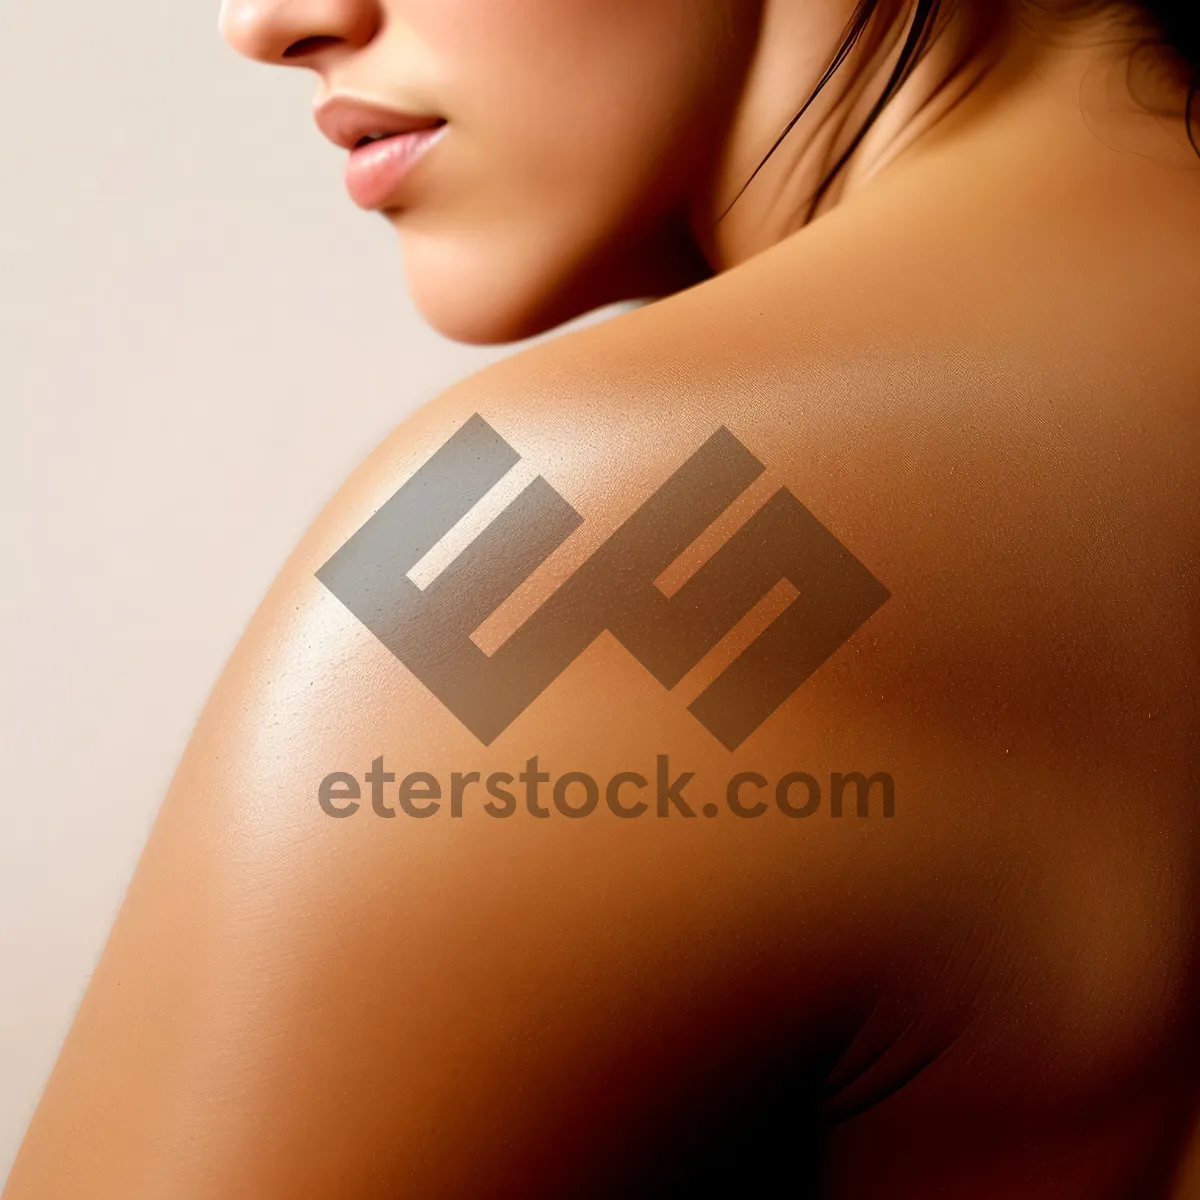 Picture of Radiant Beauty: Attractive, Pretty, and Healthy Shoulder Portrait